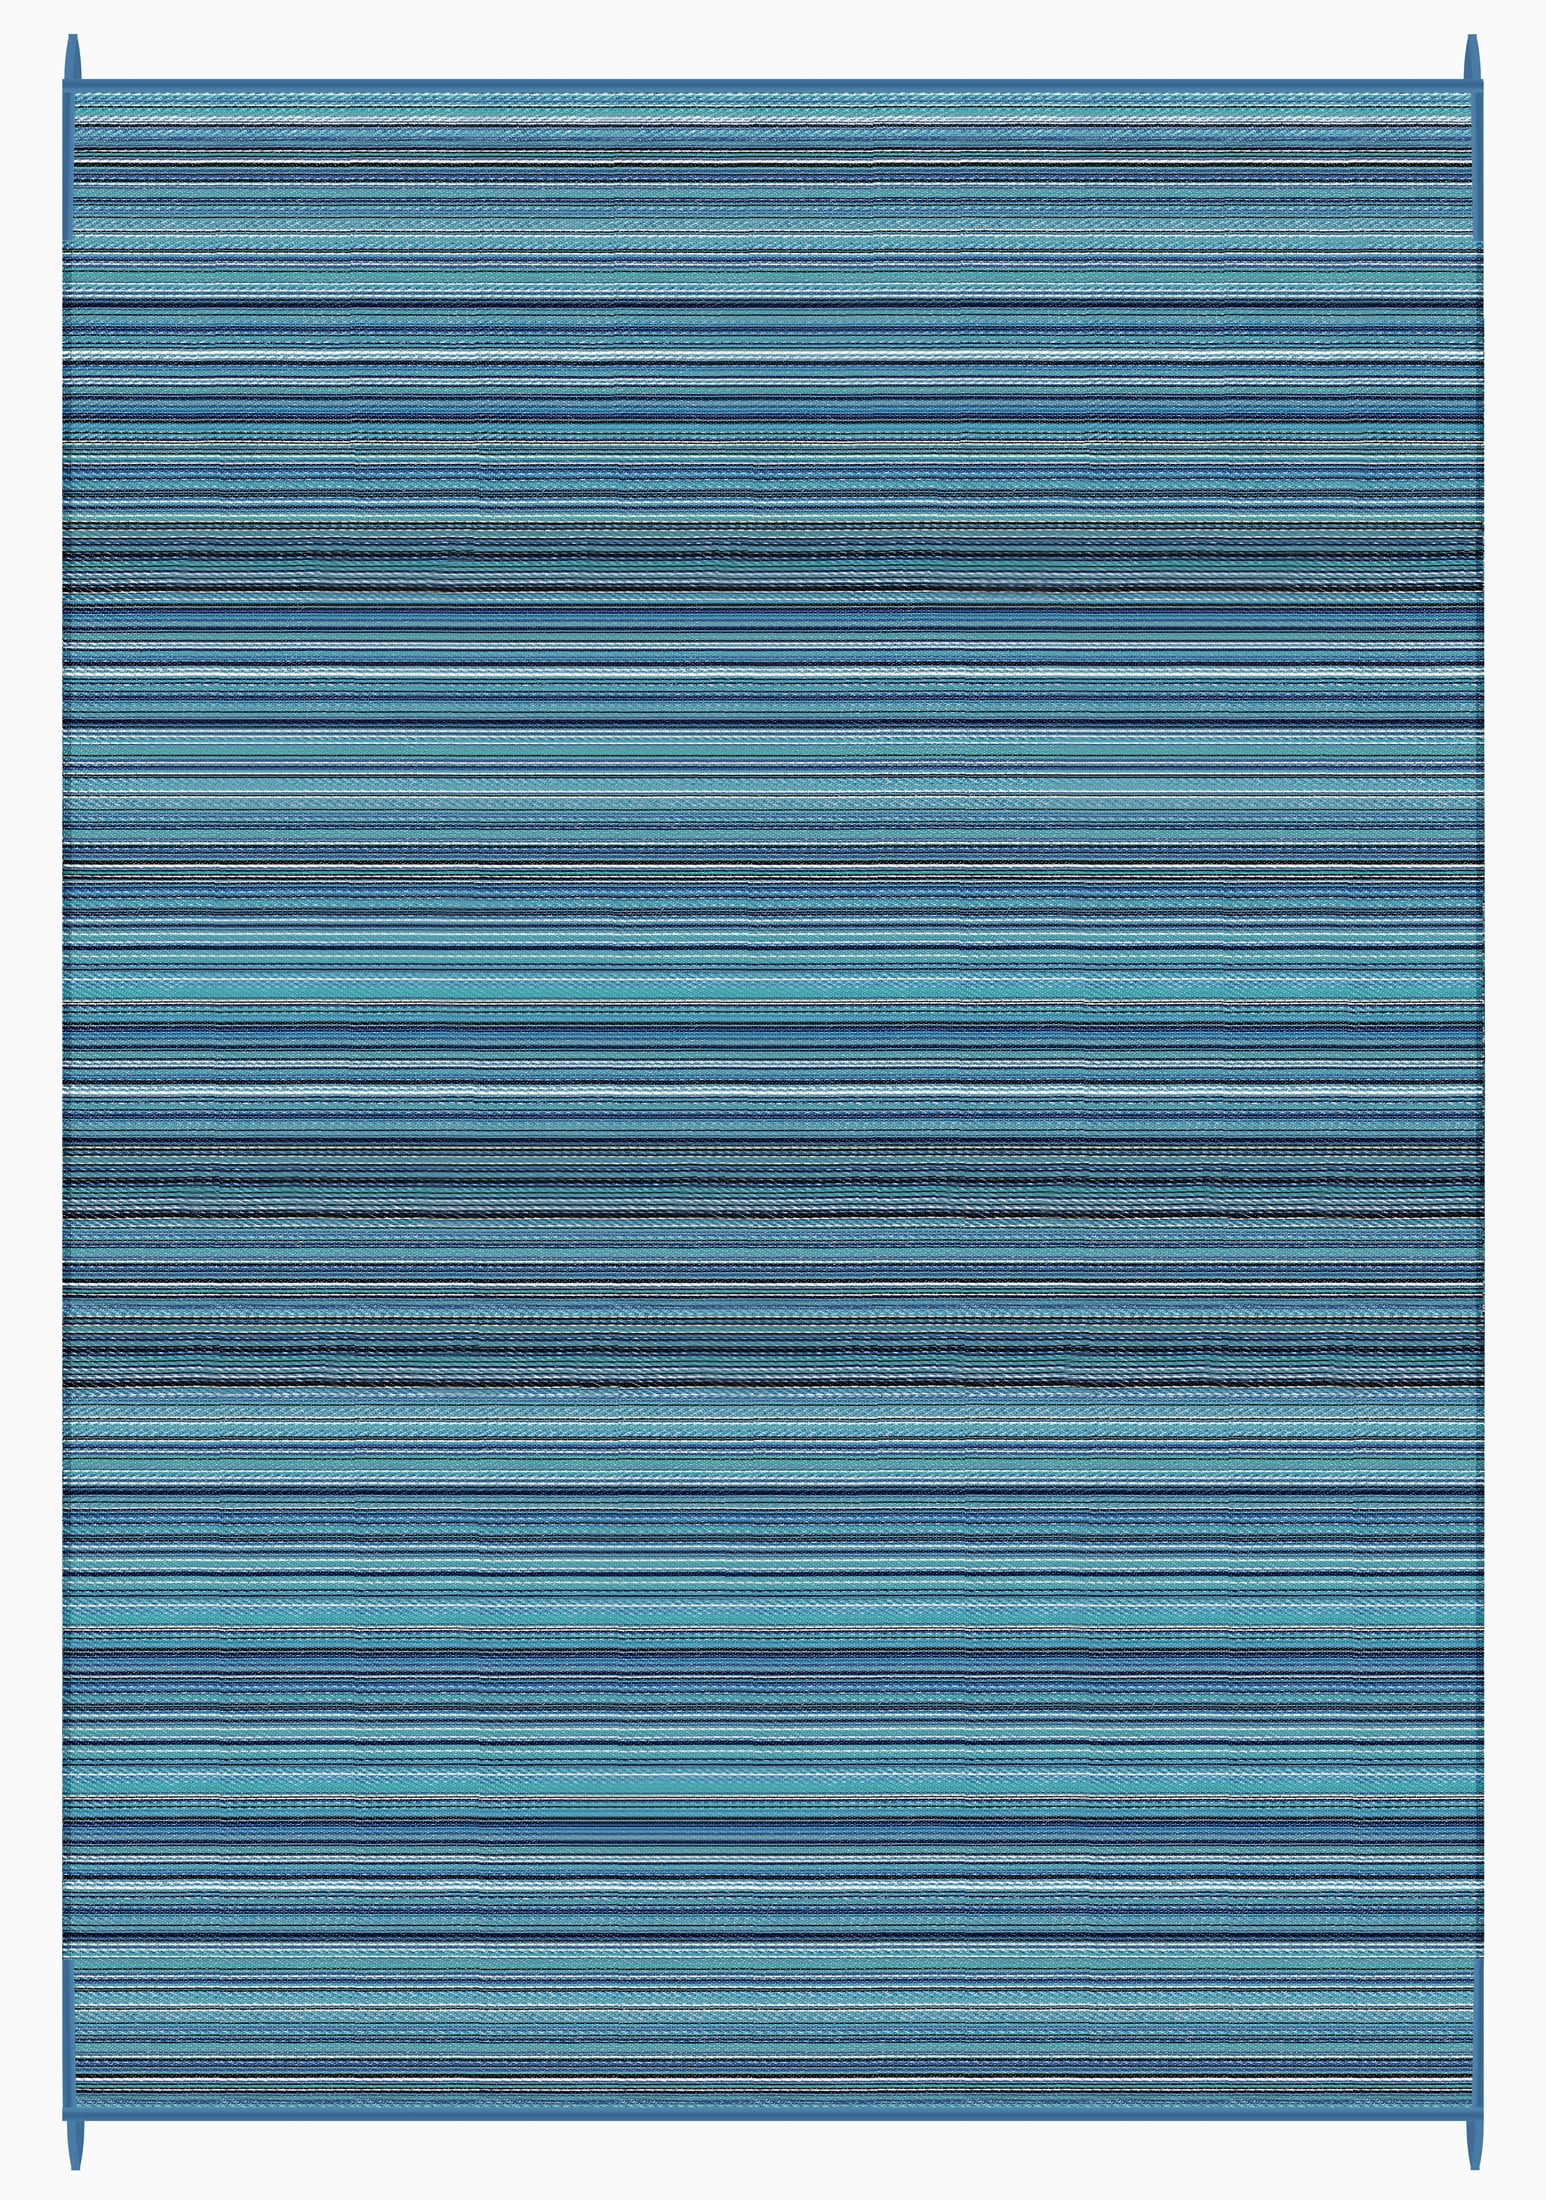 FH Home Outdoor Rug - Waterproof, Fade Resistant, Crease-Free - Premium  Recycled Plastic - Striped - Patio, Deck, Porch, Balcony - Havana -  Turquoise - 5 x 8 ft 